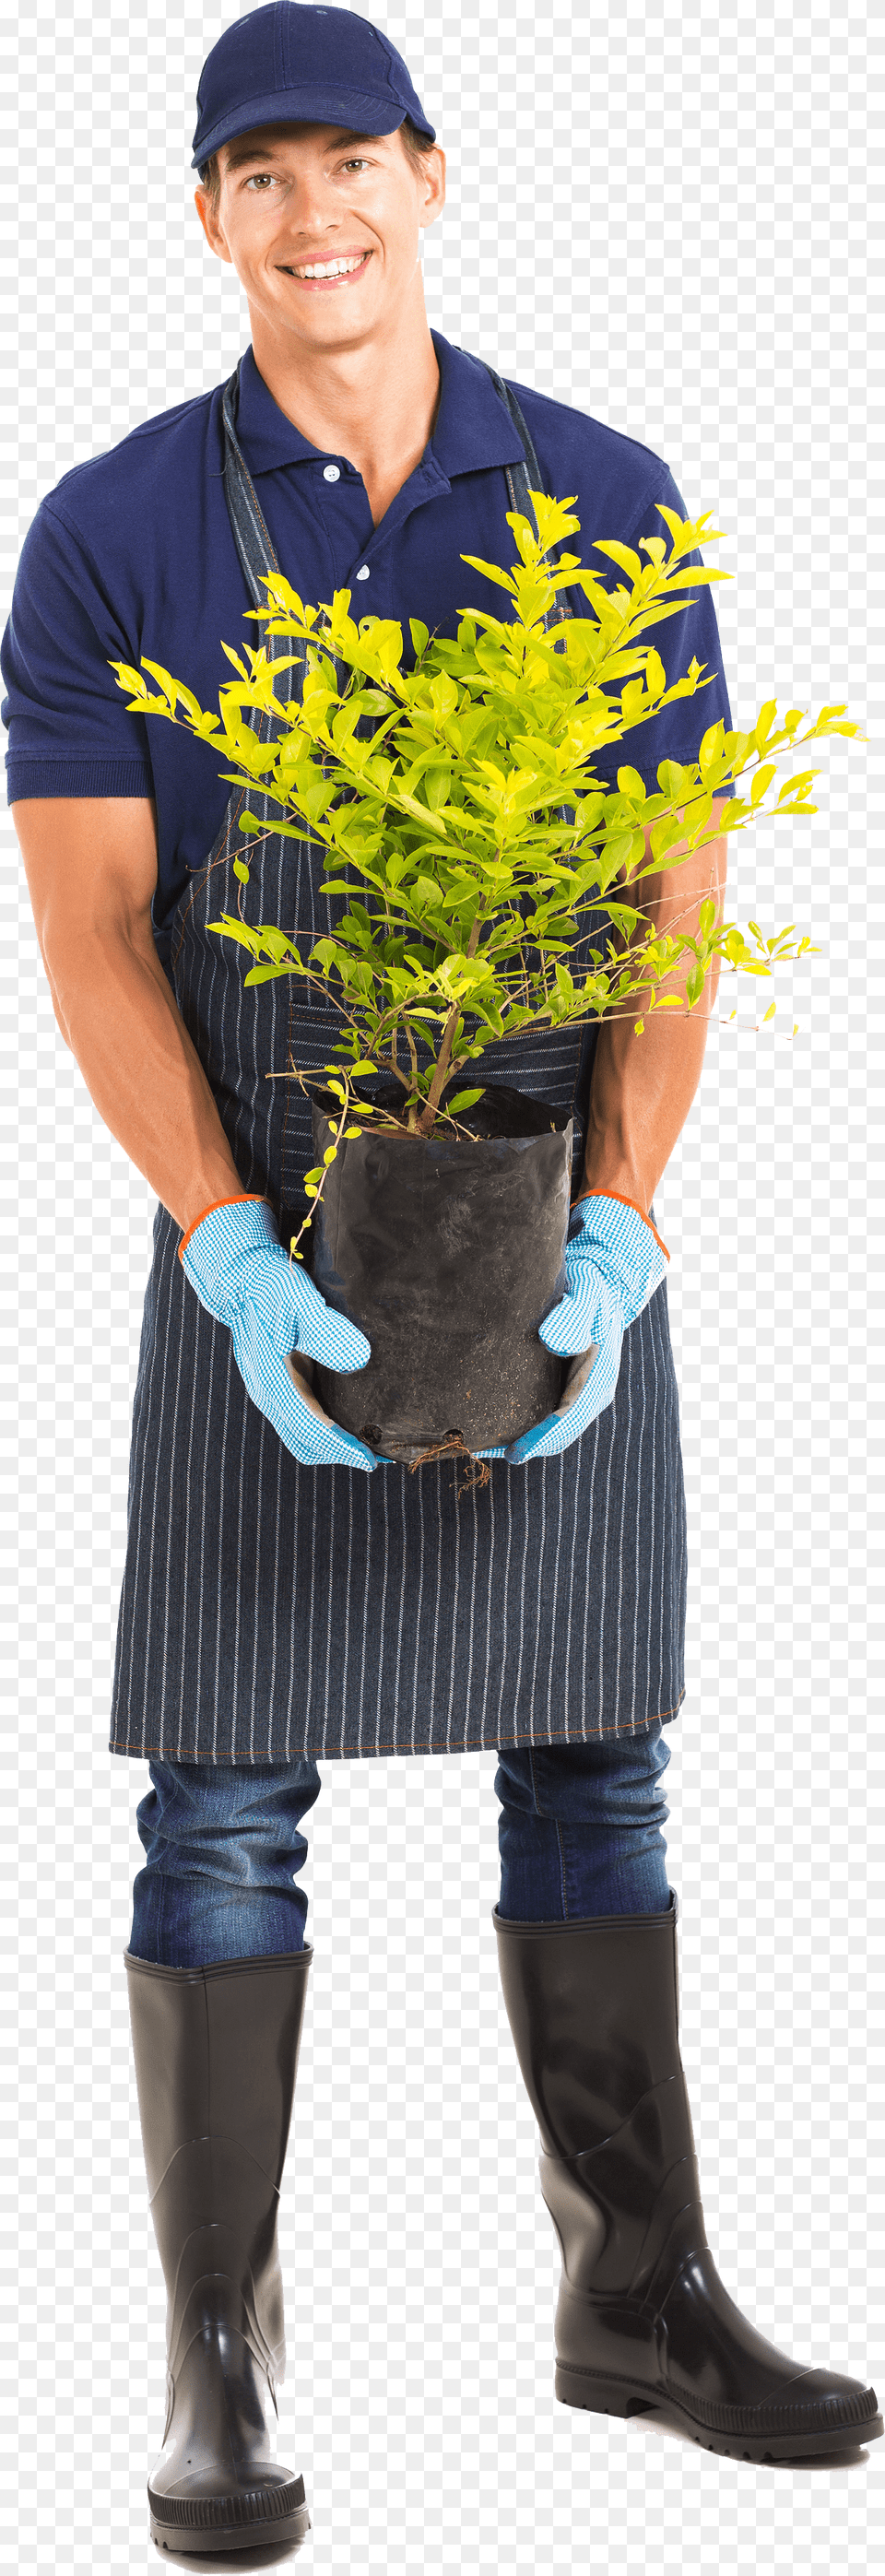 Honest And Dependable Gardening Person, Garden, Outdoors, Clothing, Nature Png